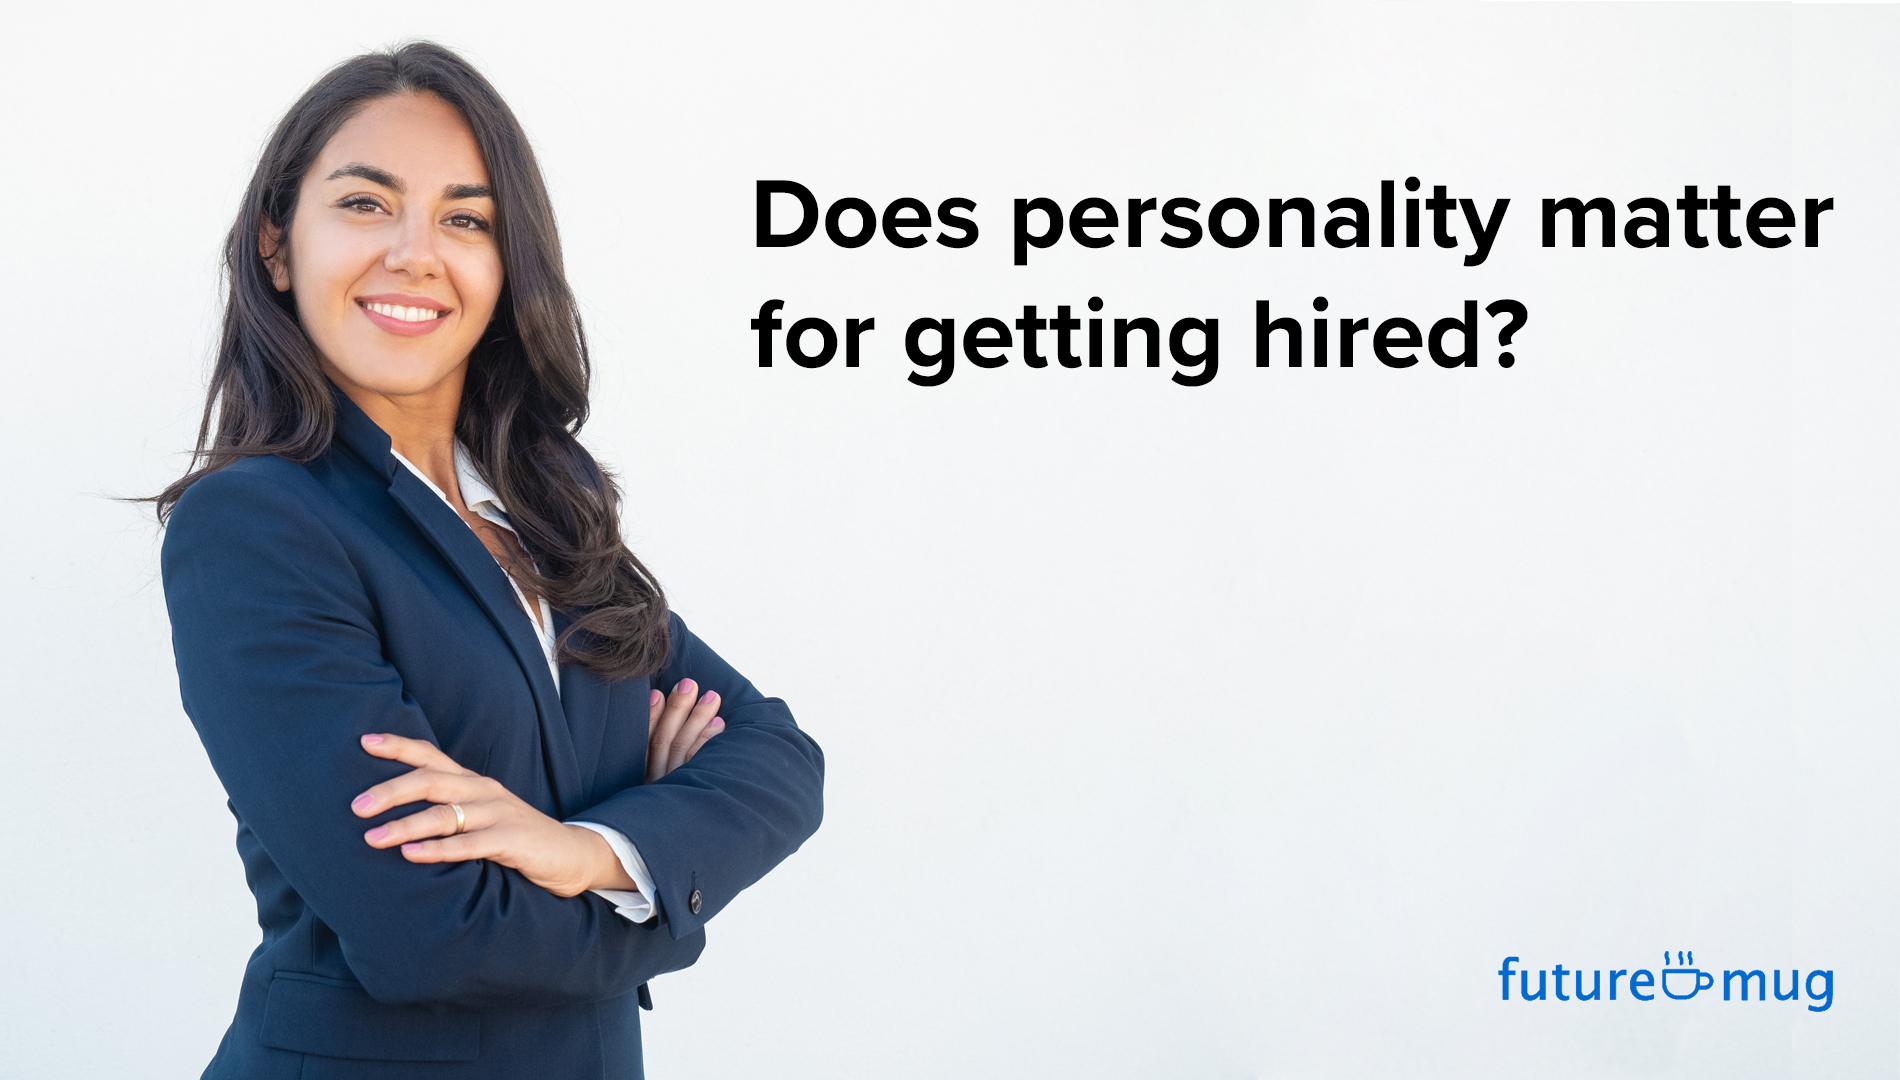 Does personality matter for getting hired?